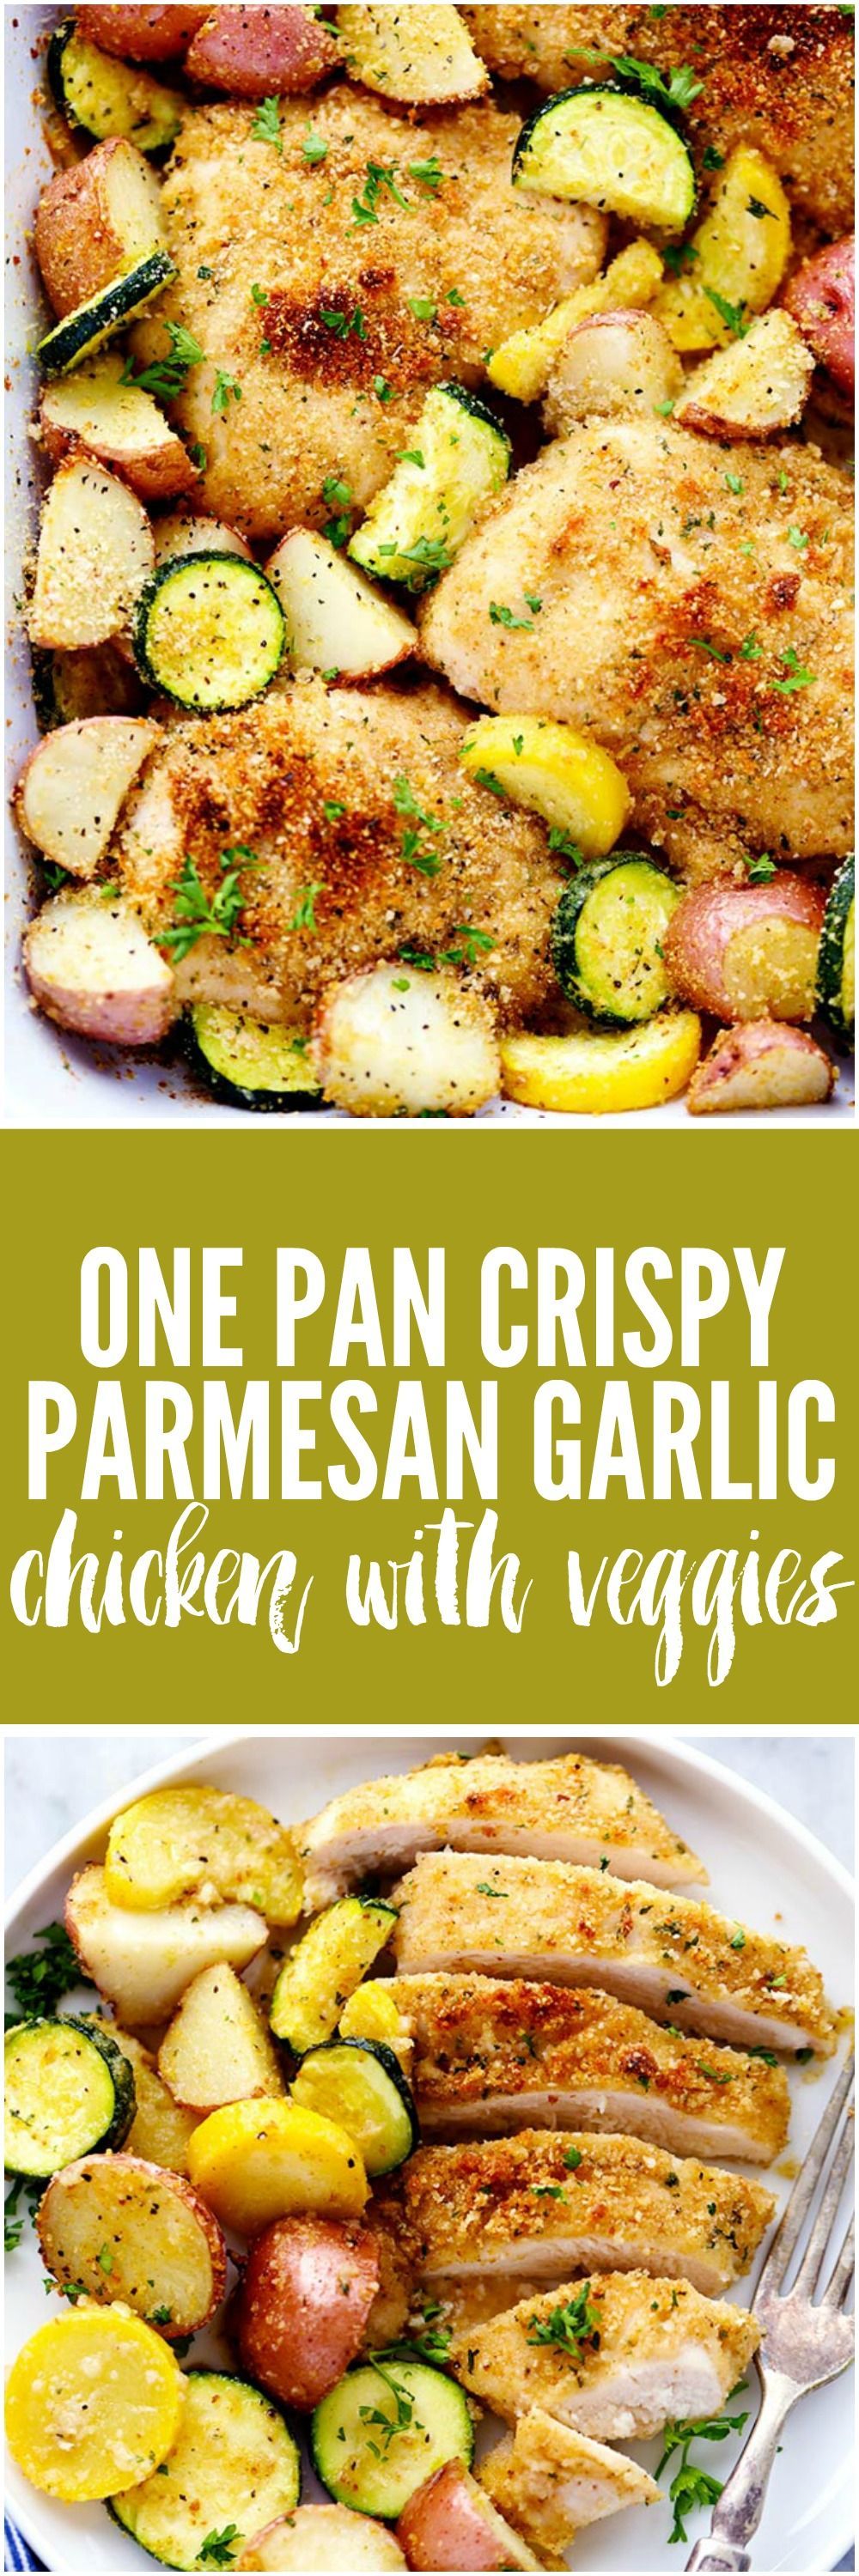 One Pan Crispy Parmesan Garlic Chicken with Vegetables will be one of the best one pan meals you ever make. The tender and juicy